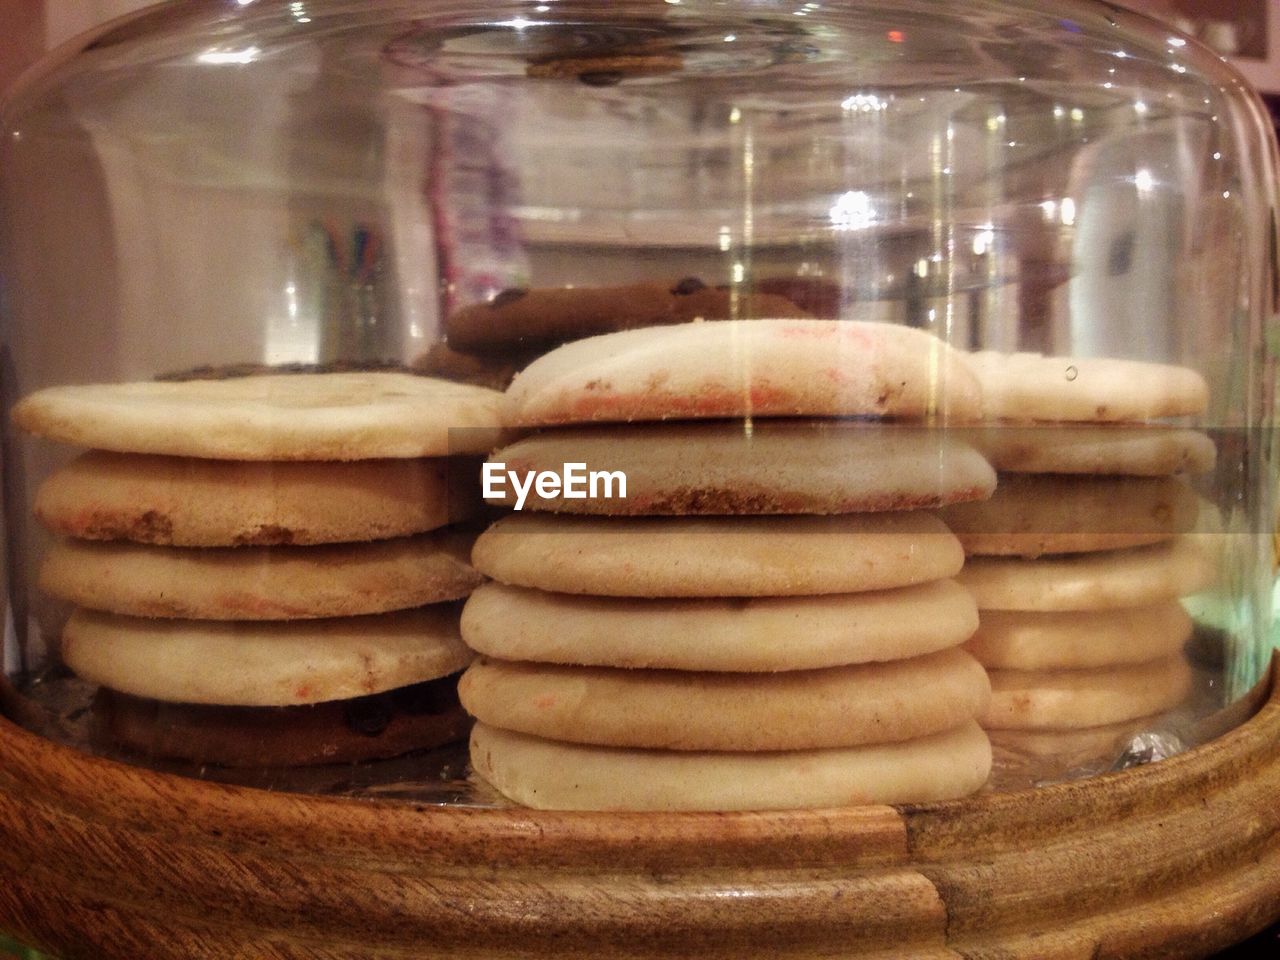 Stack of cookies in glass jar